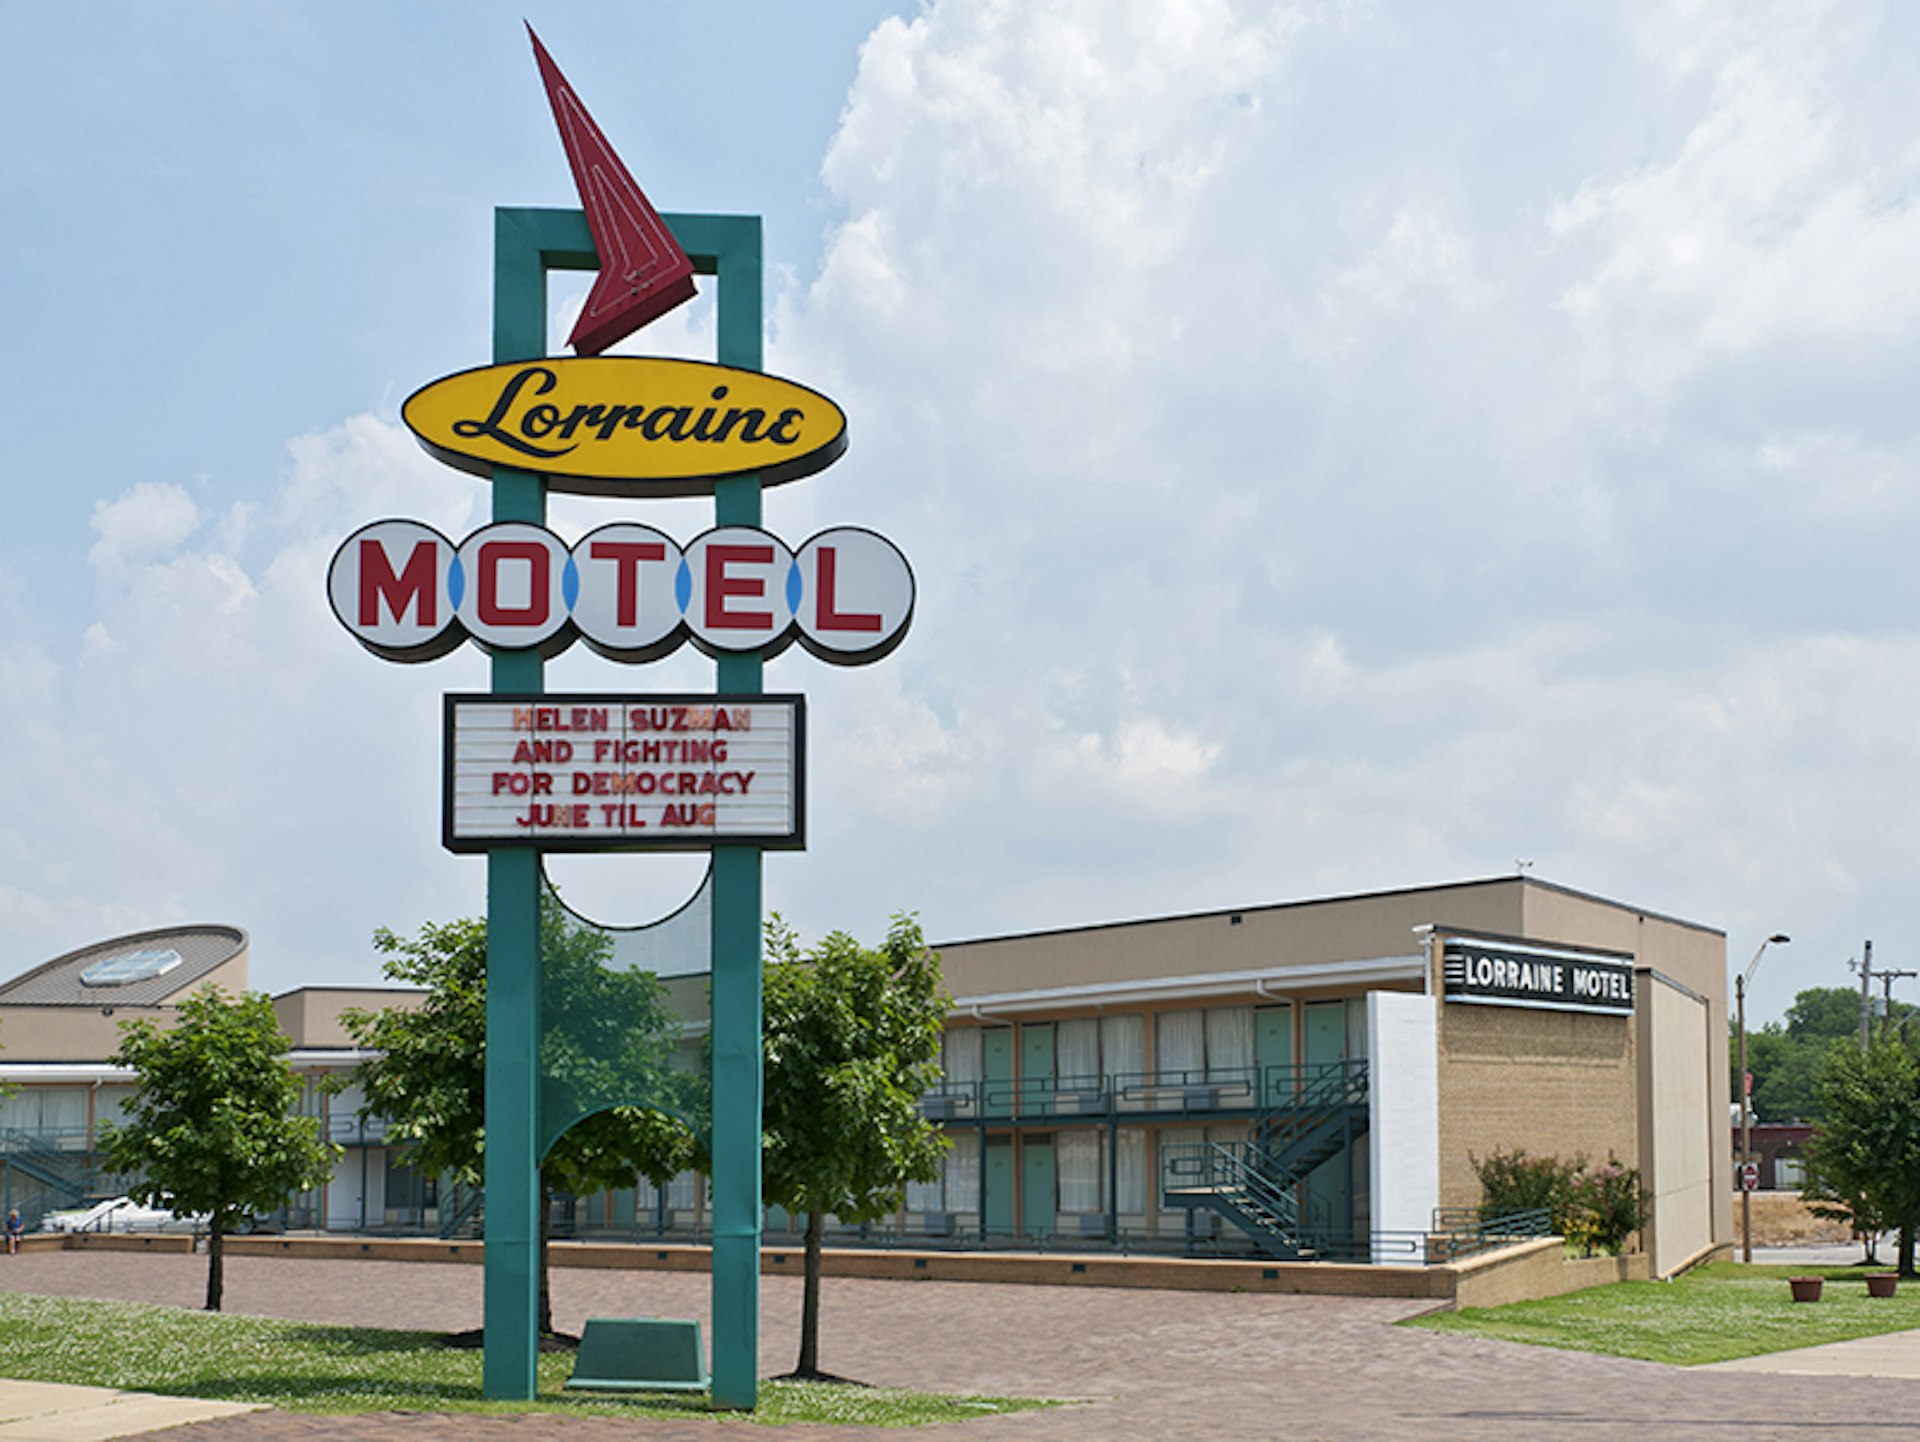 National Civil Rights Museum at the Lorraine Motel. Photo by Stephen Saks/Getty Images